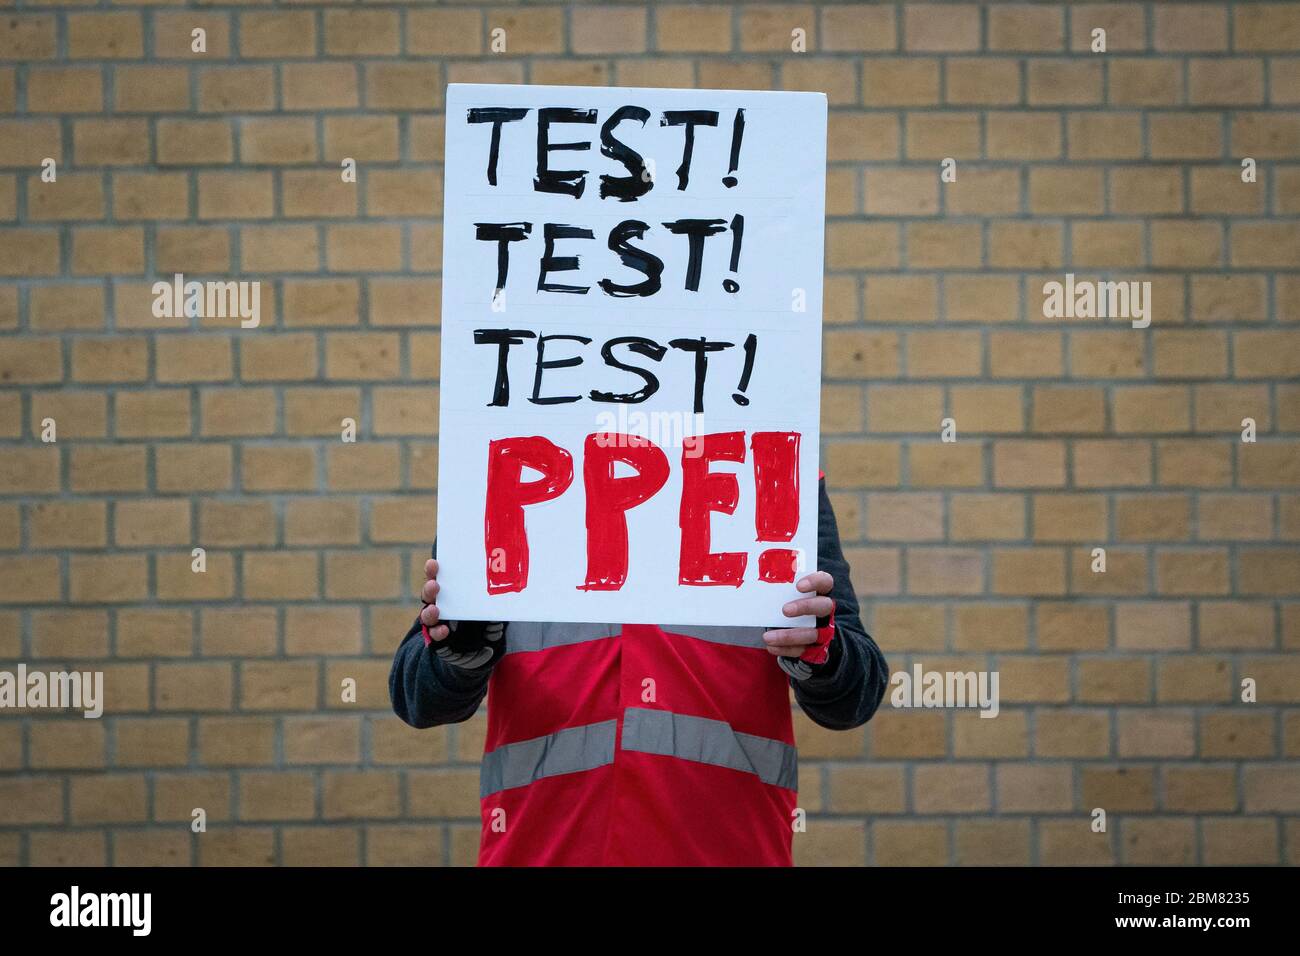 A member of the public protests about PPE and testing outside Whittington Health in London join in the applause to salute local heroes during Thursday's nationwide Clap for Carers initiative to recognise and support NHS workers and carers fighting the coronavirus pandemic. Stock Photo